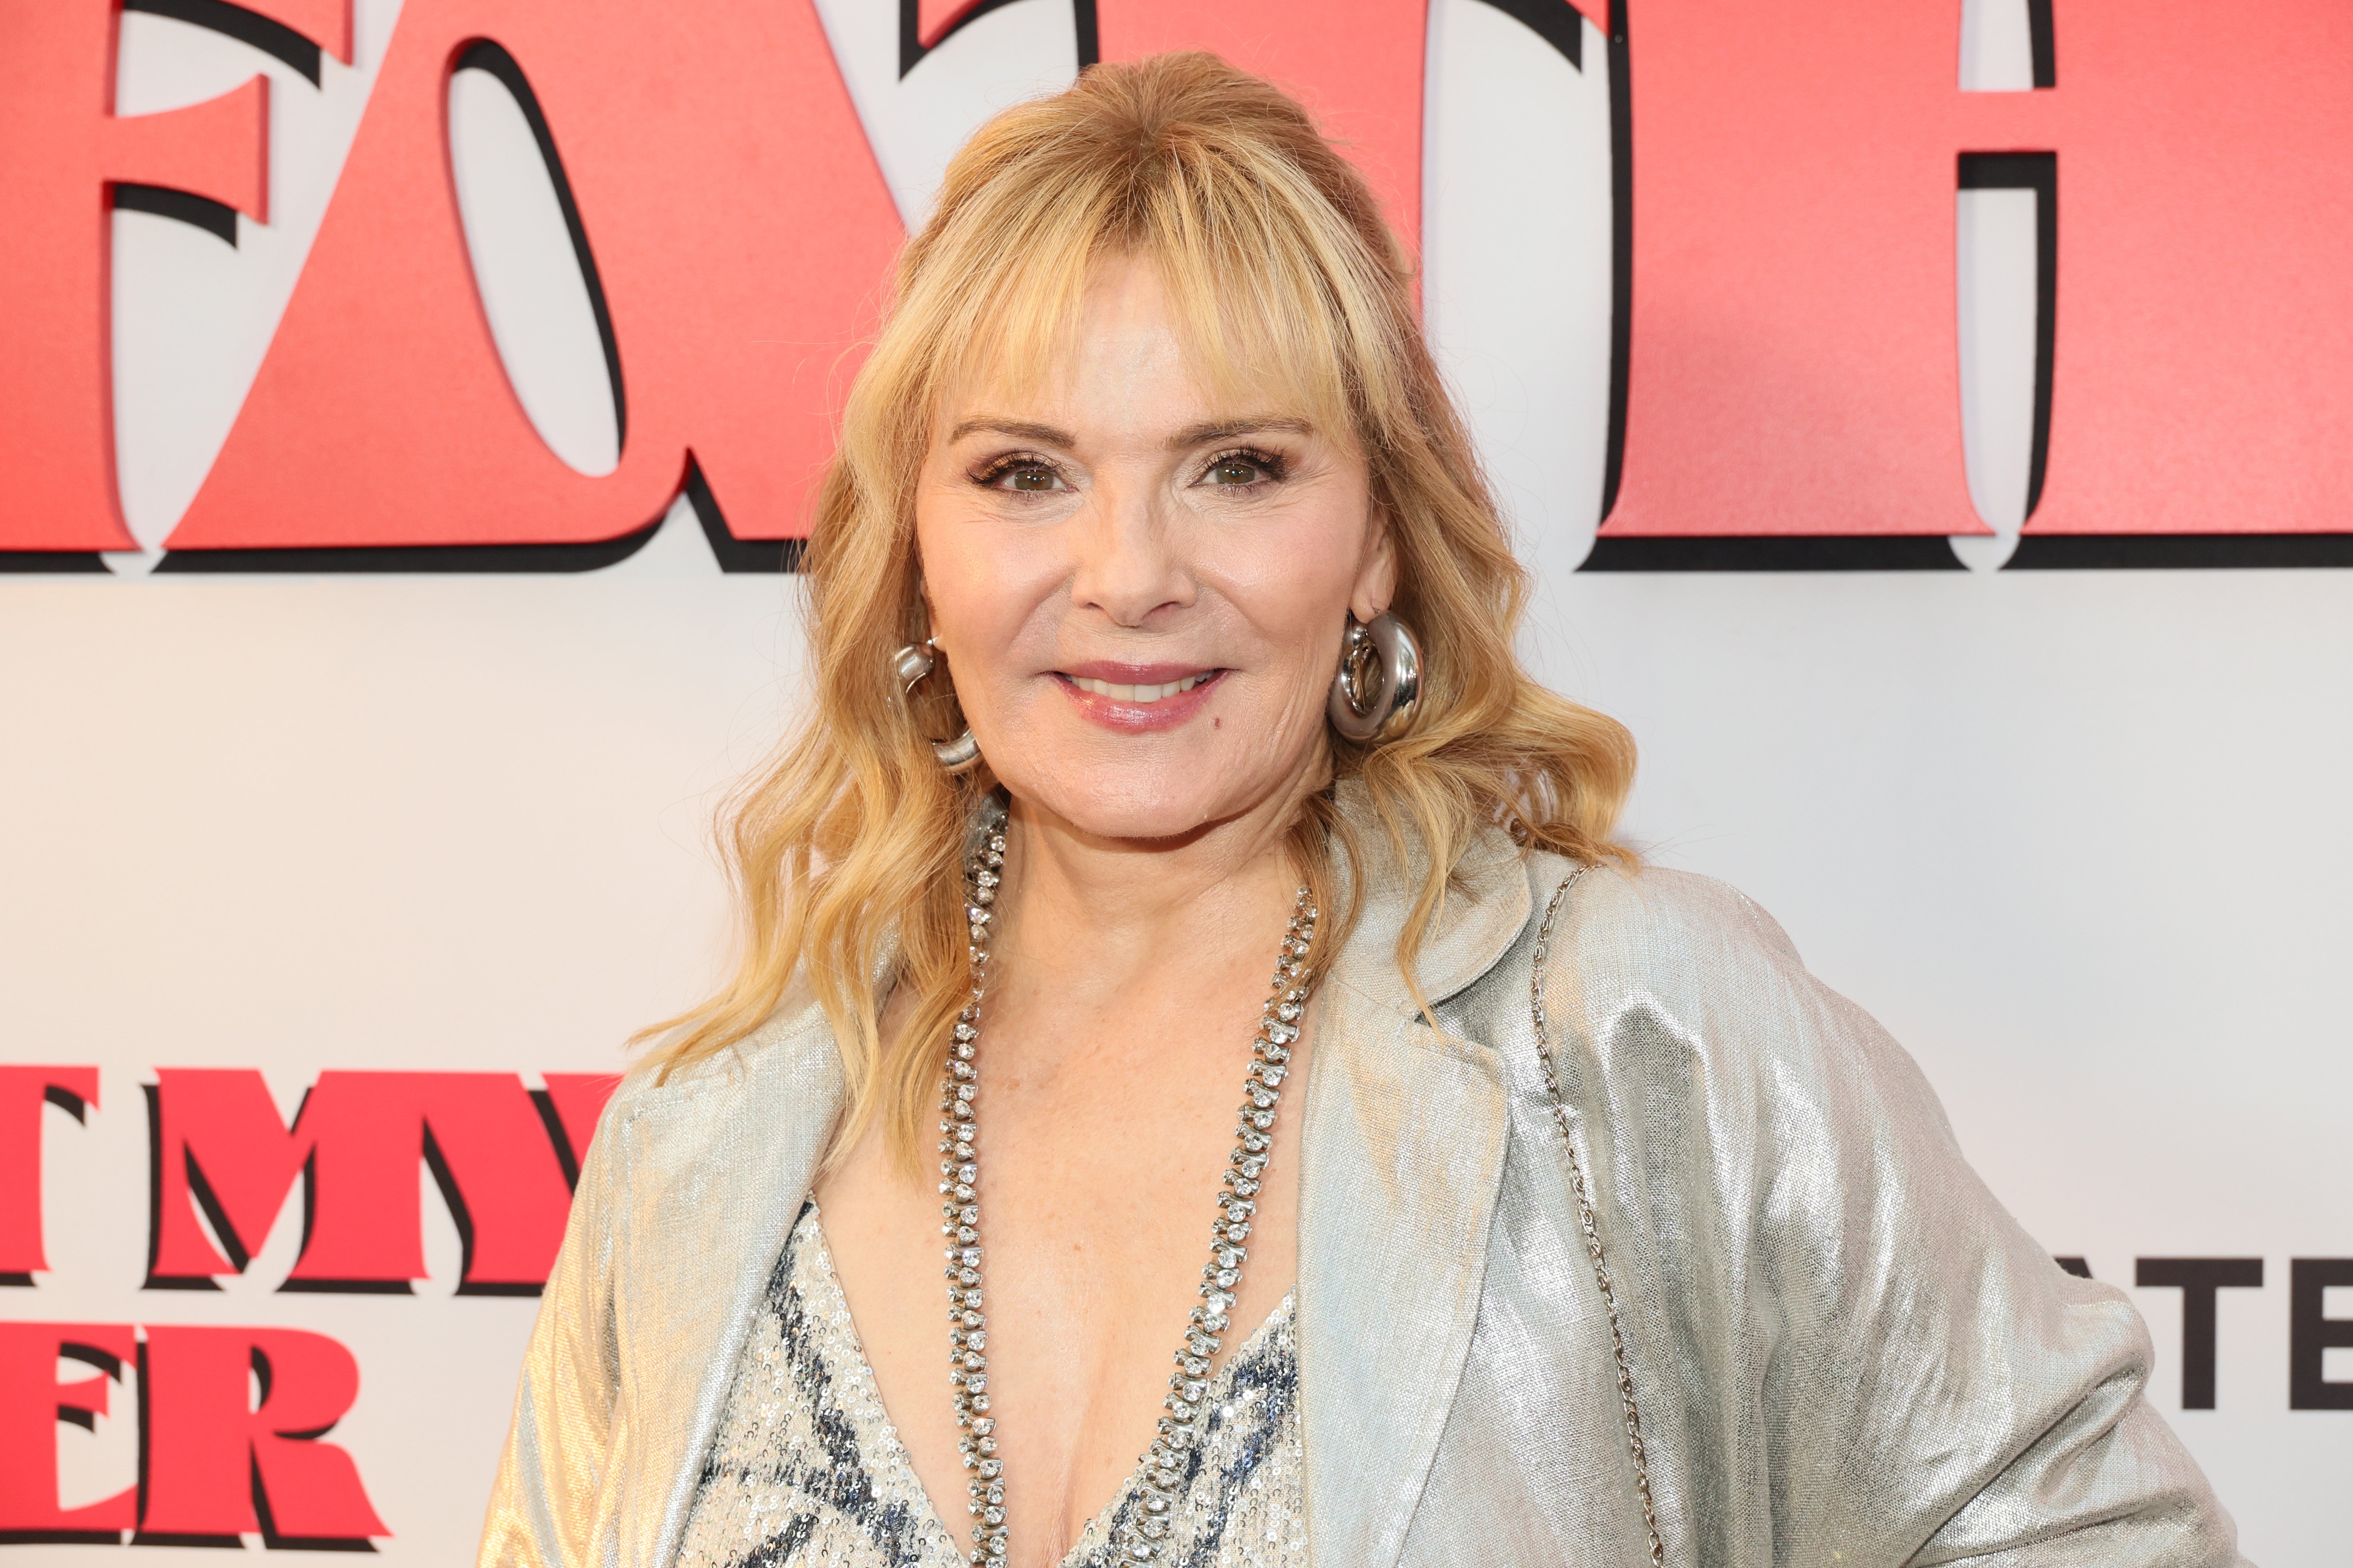 Kim Cattrall reveals changed plastic surgery attitude, is 'battling aging in every way'